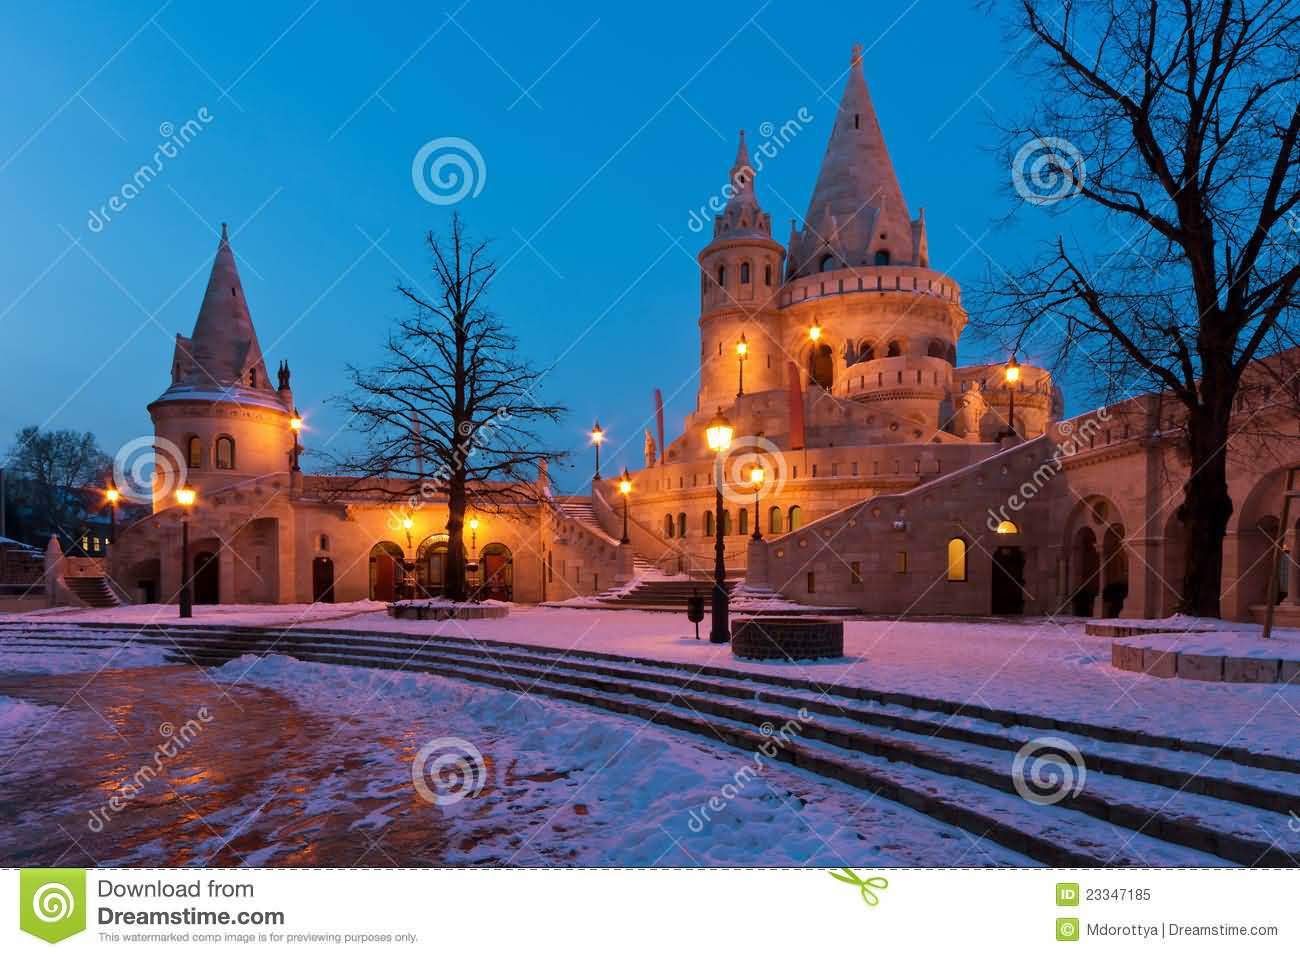 Winter Scene Of The Fisherman's Bastion In Budapest